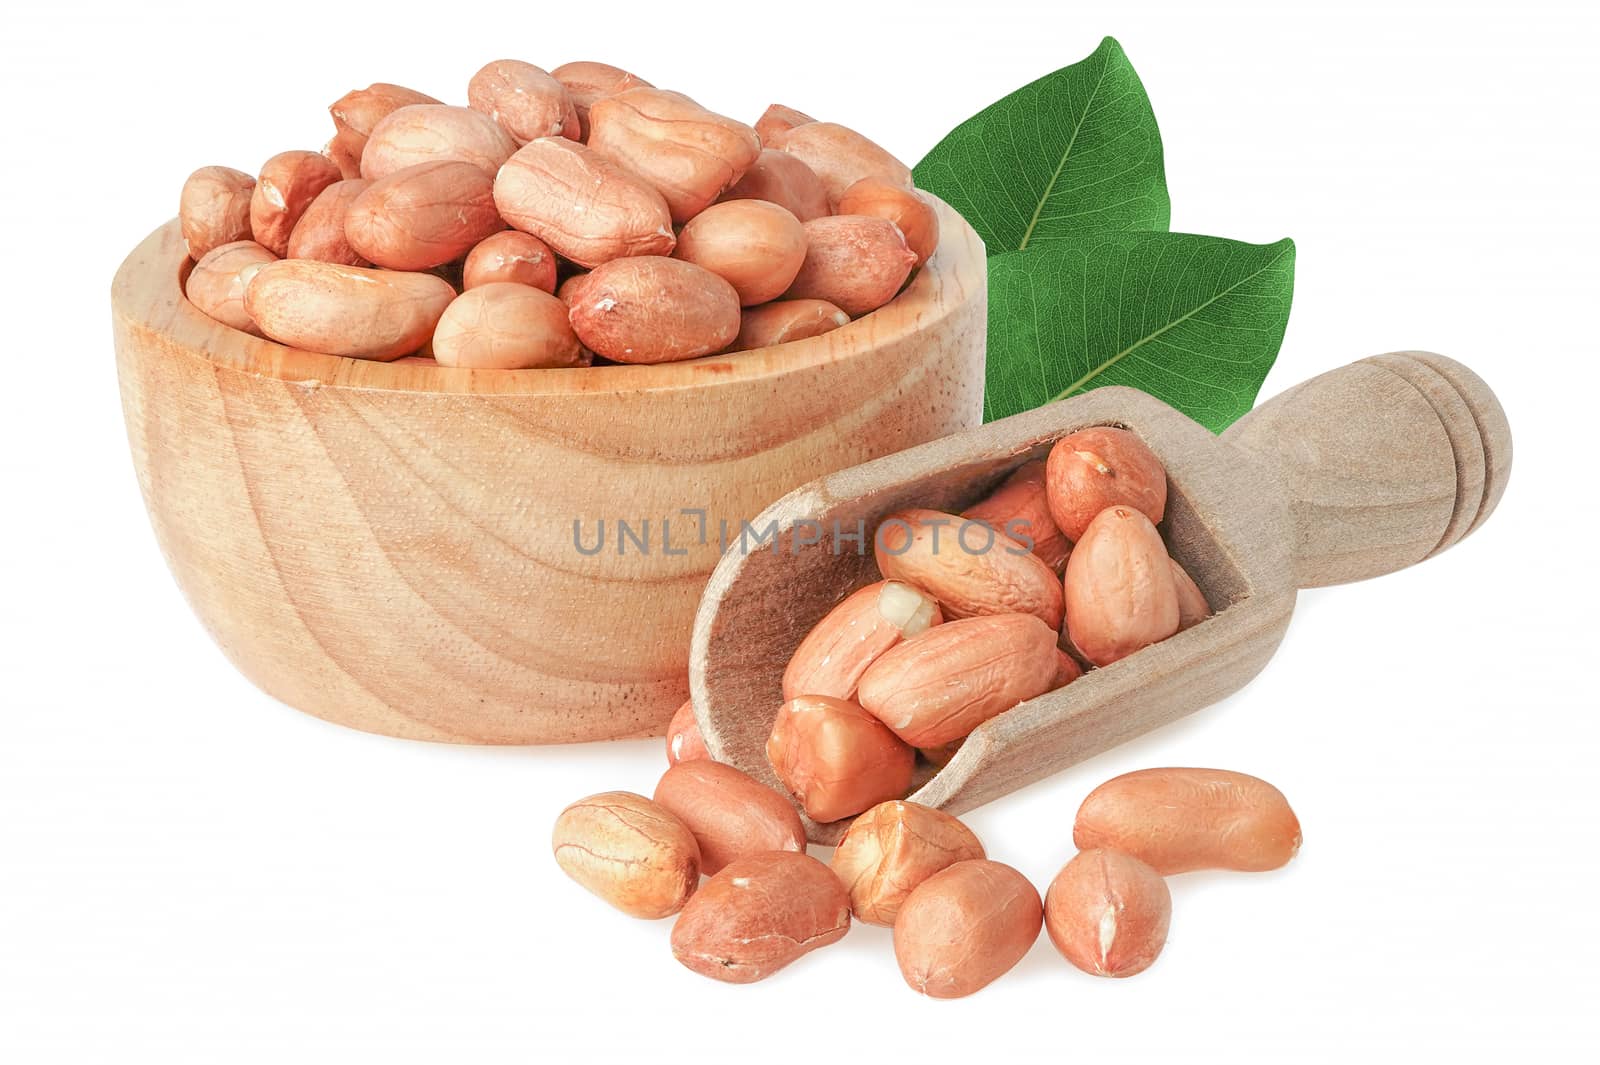 Peanuts in wooden blow natural grain seeds isolated on white background with clipping path.